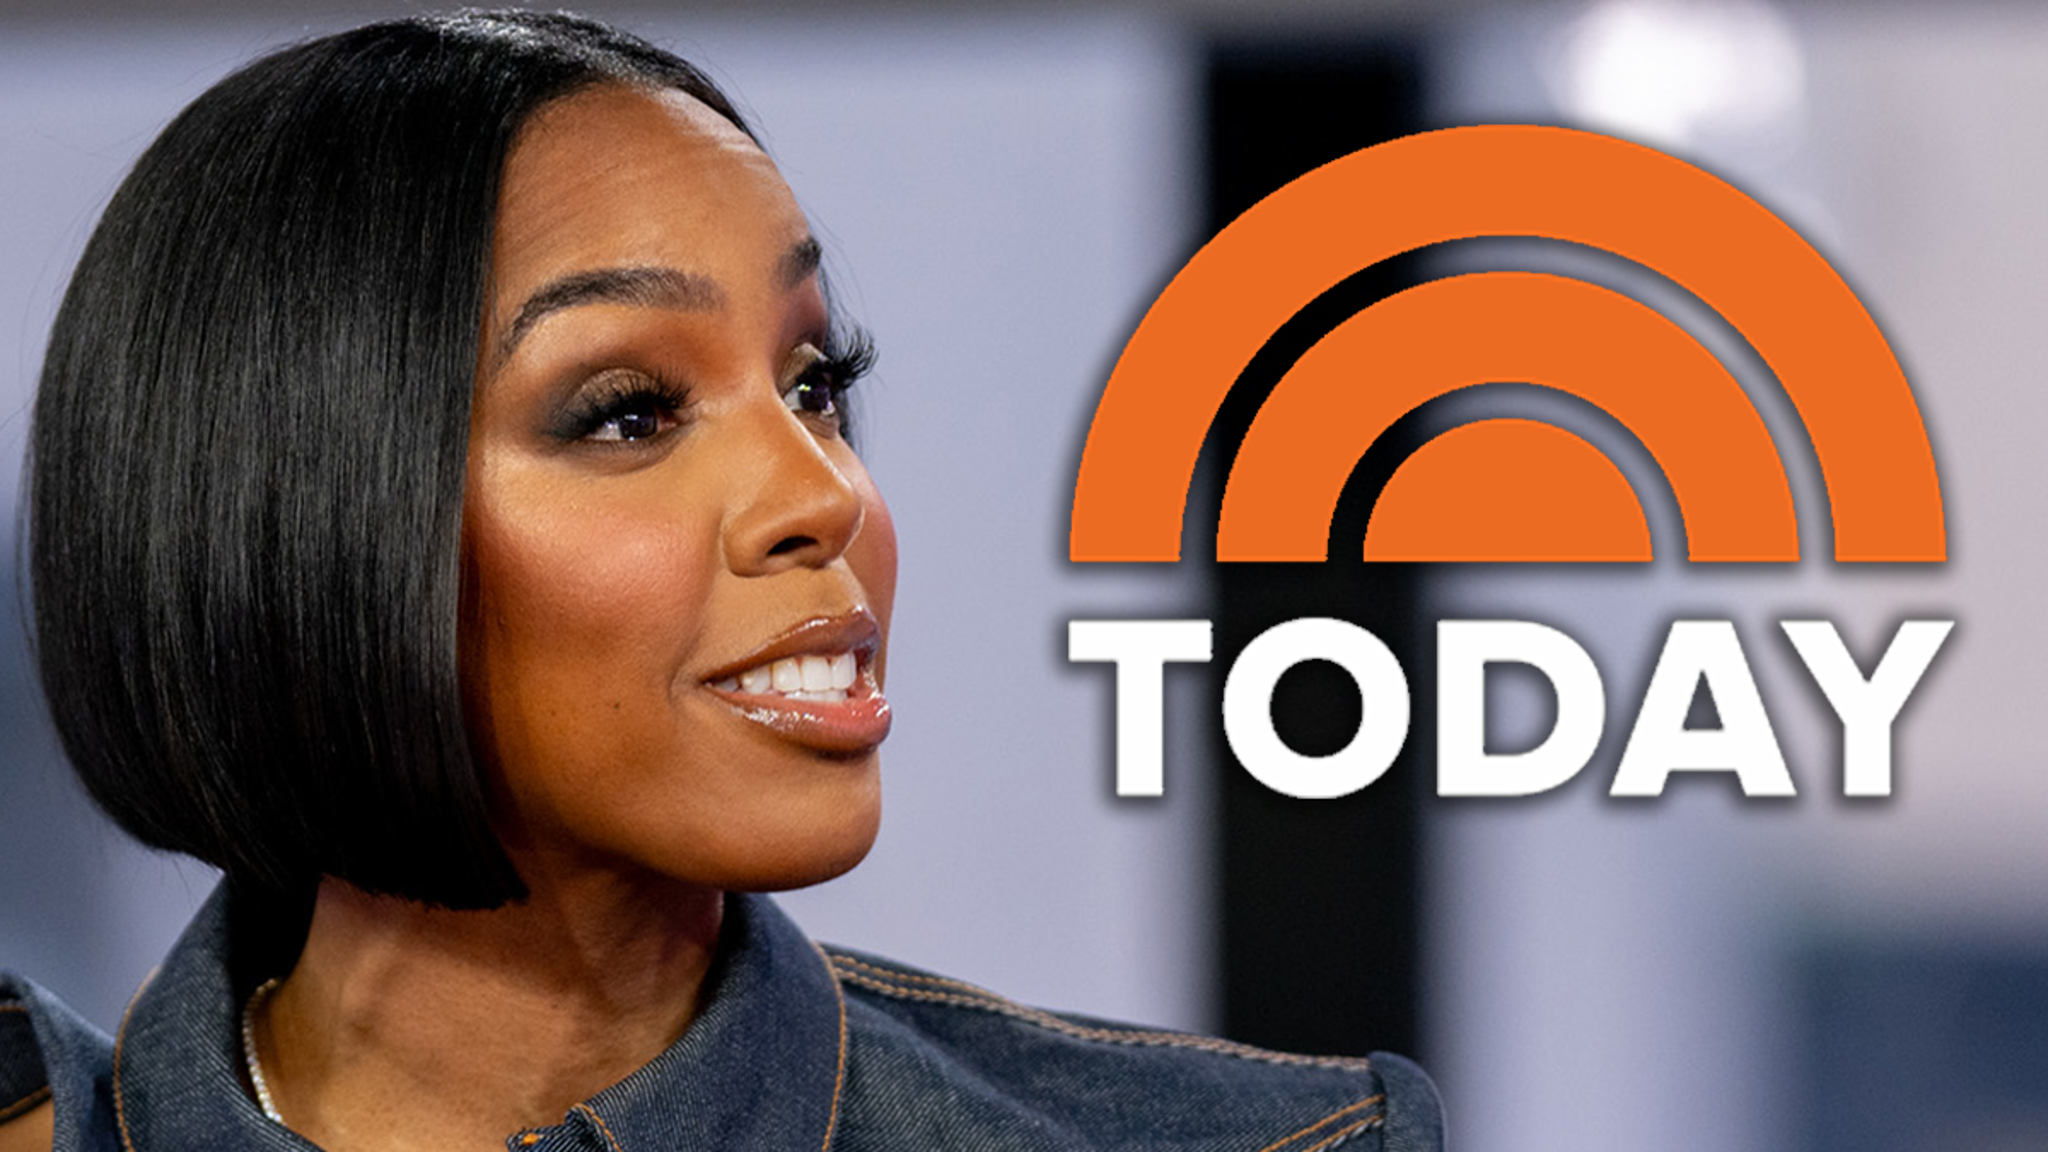 Kelly Rowland excluded from “Today” because of the locker room, no Beyoncé